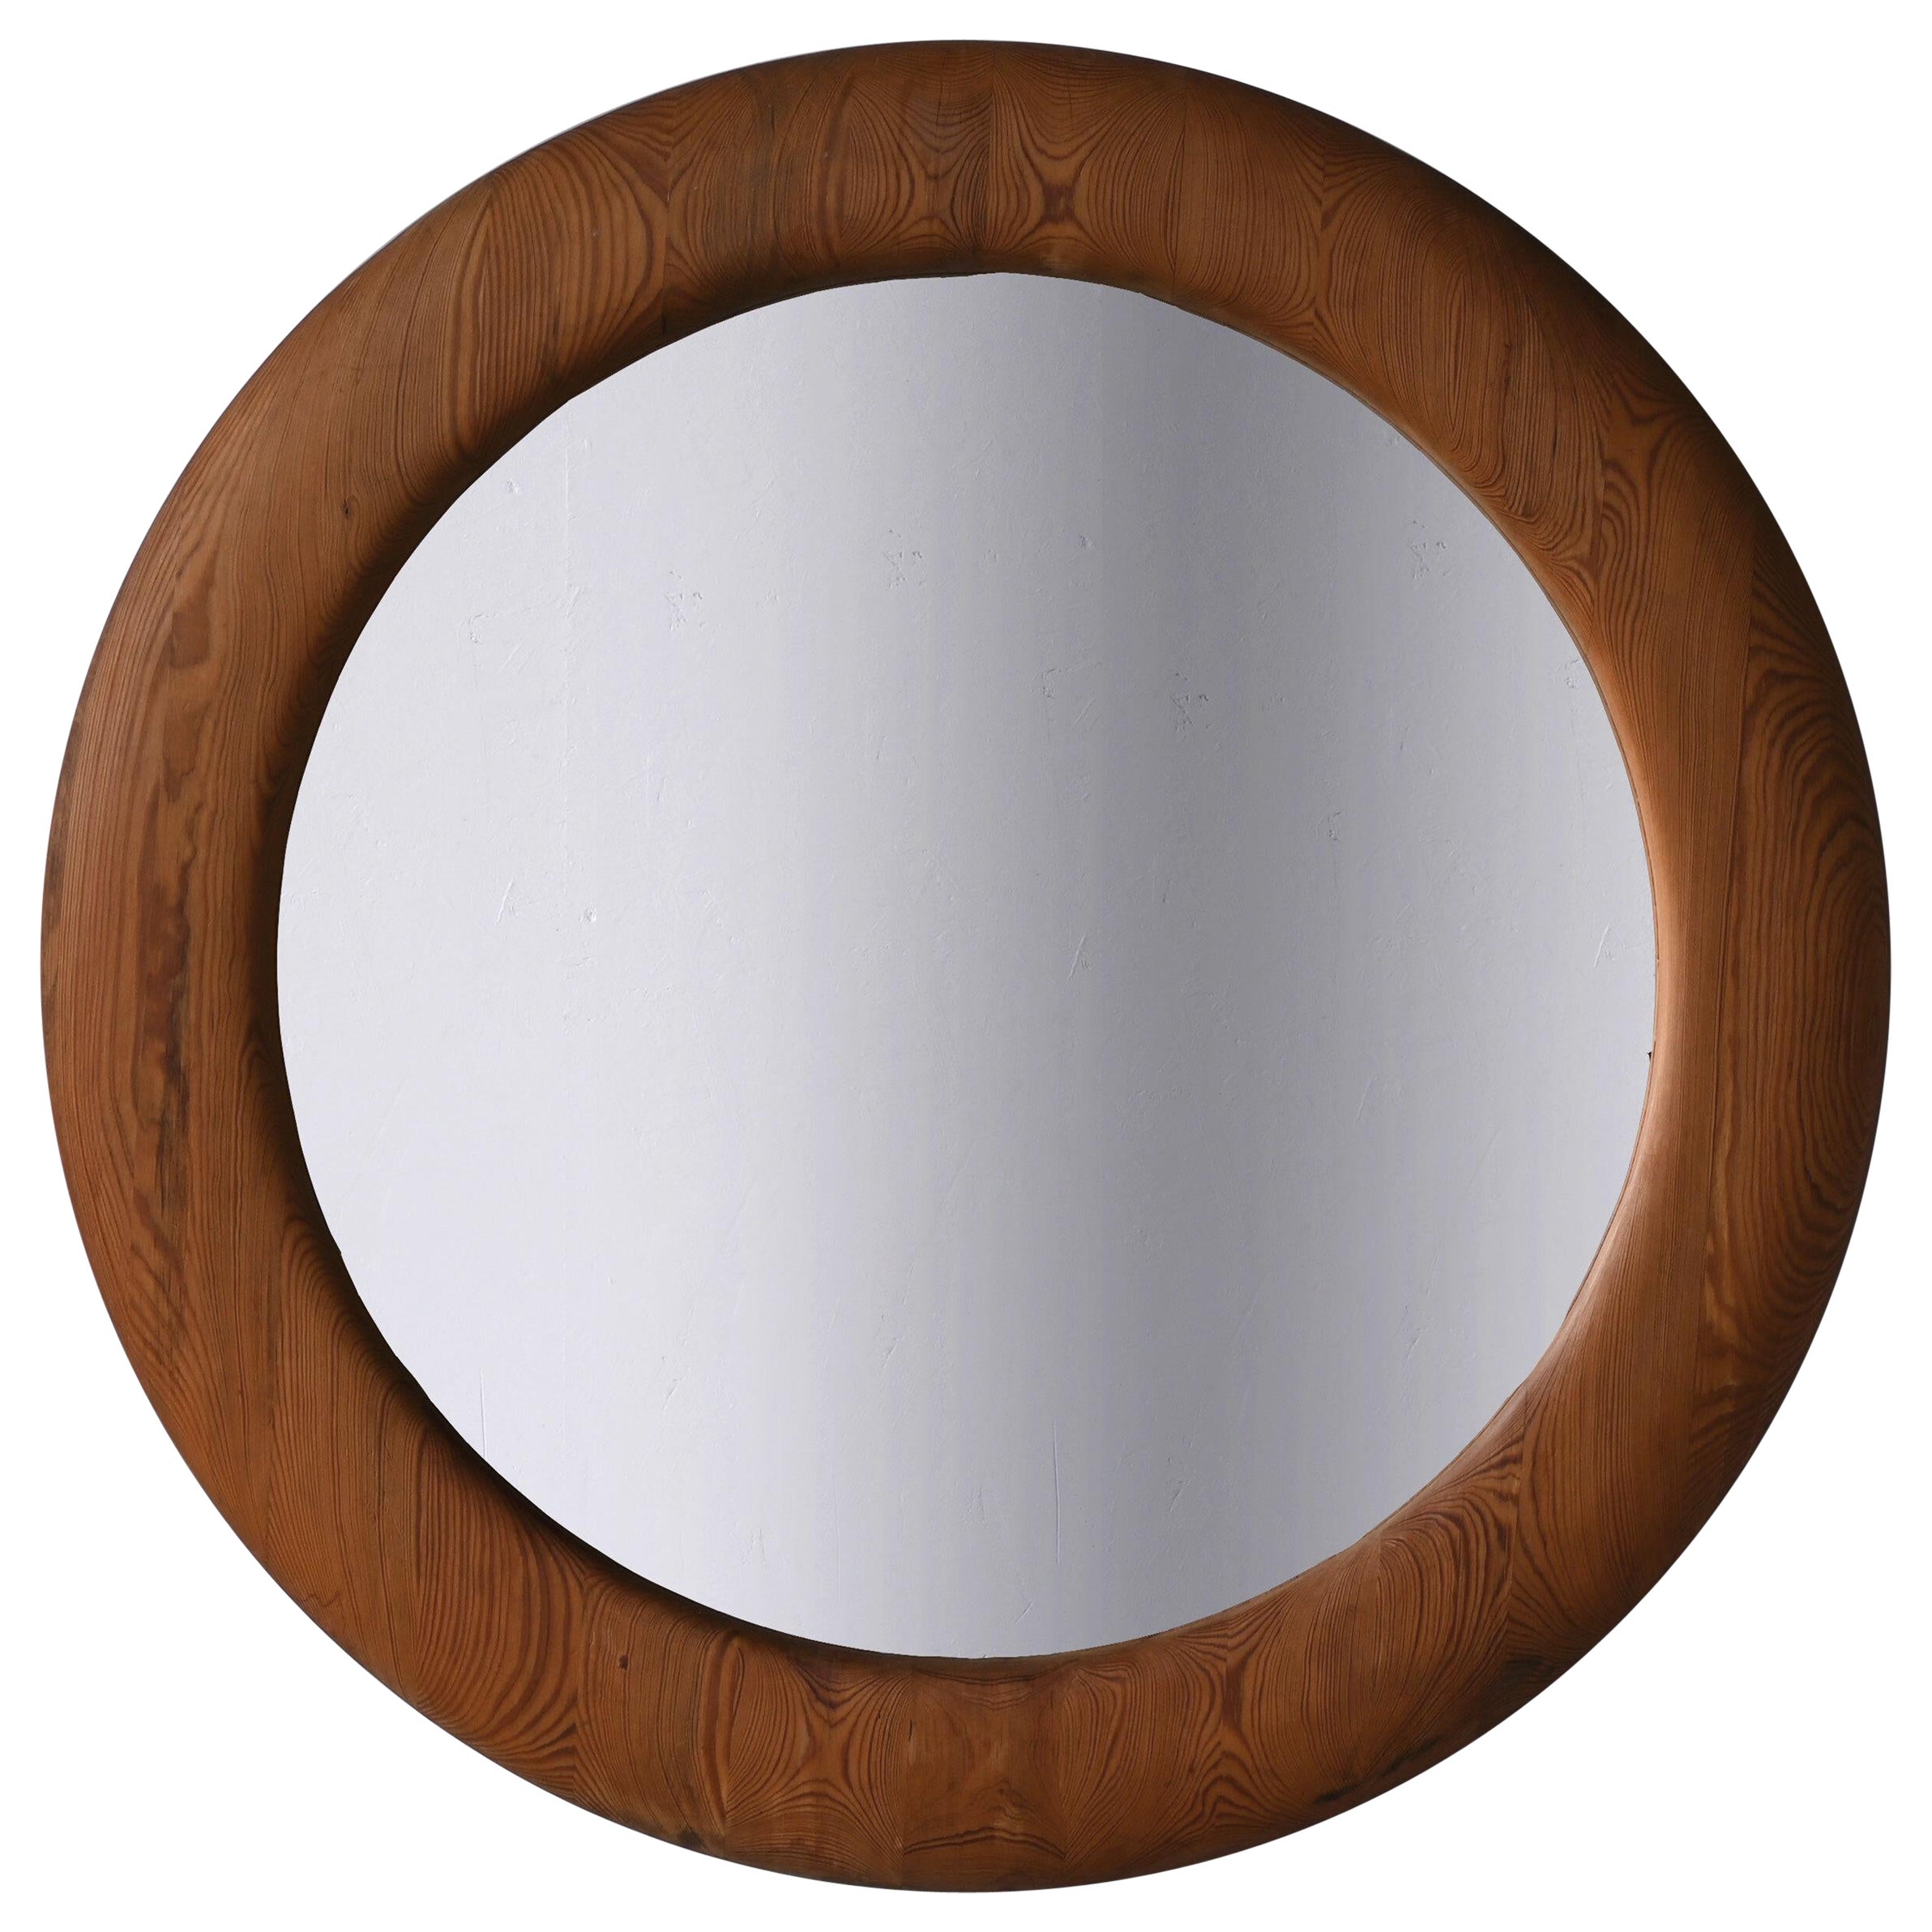 Sven Larsson, Large Wall Mirror, Solid Pine, Artist's Studio, Sweden, 1970s For Sale